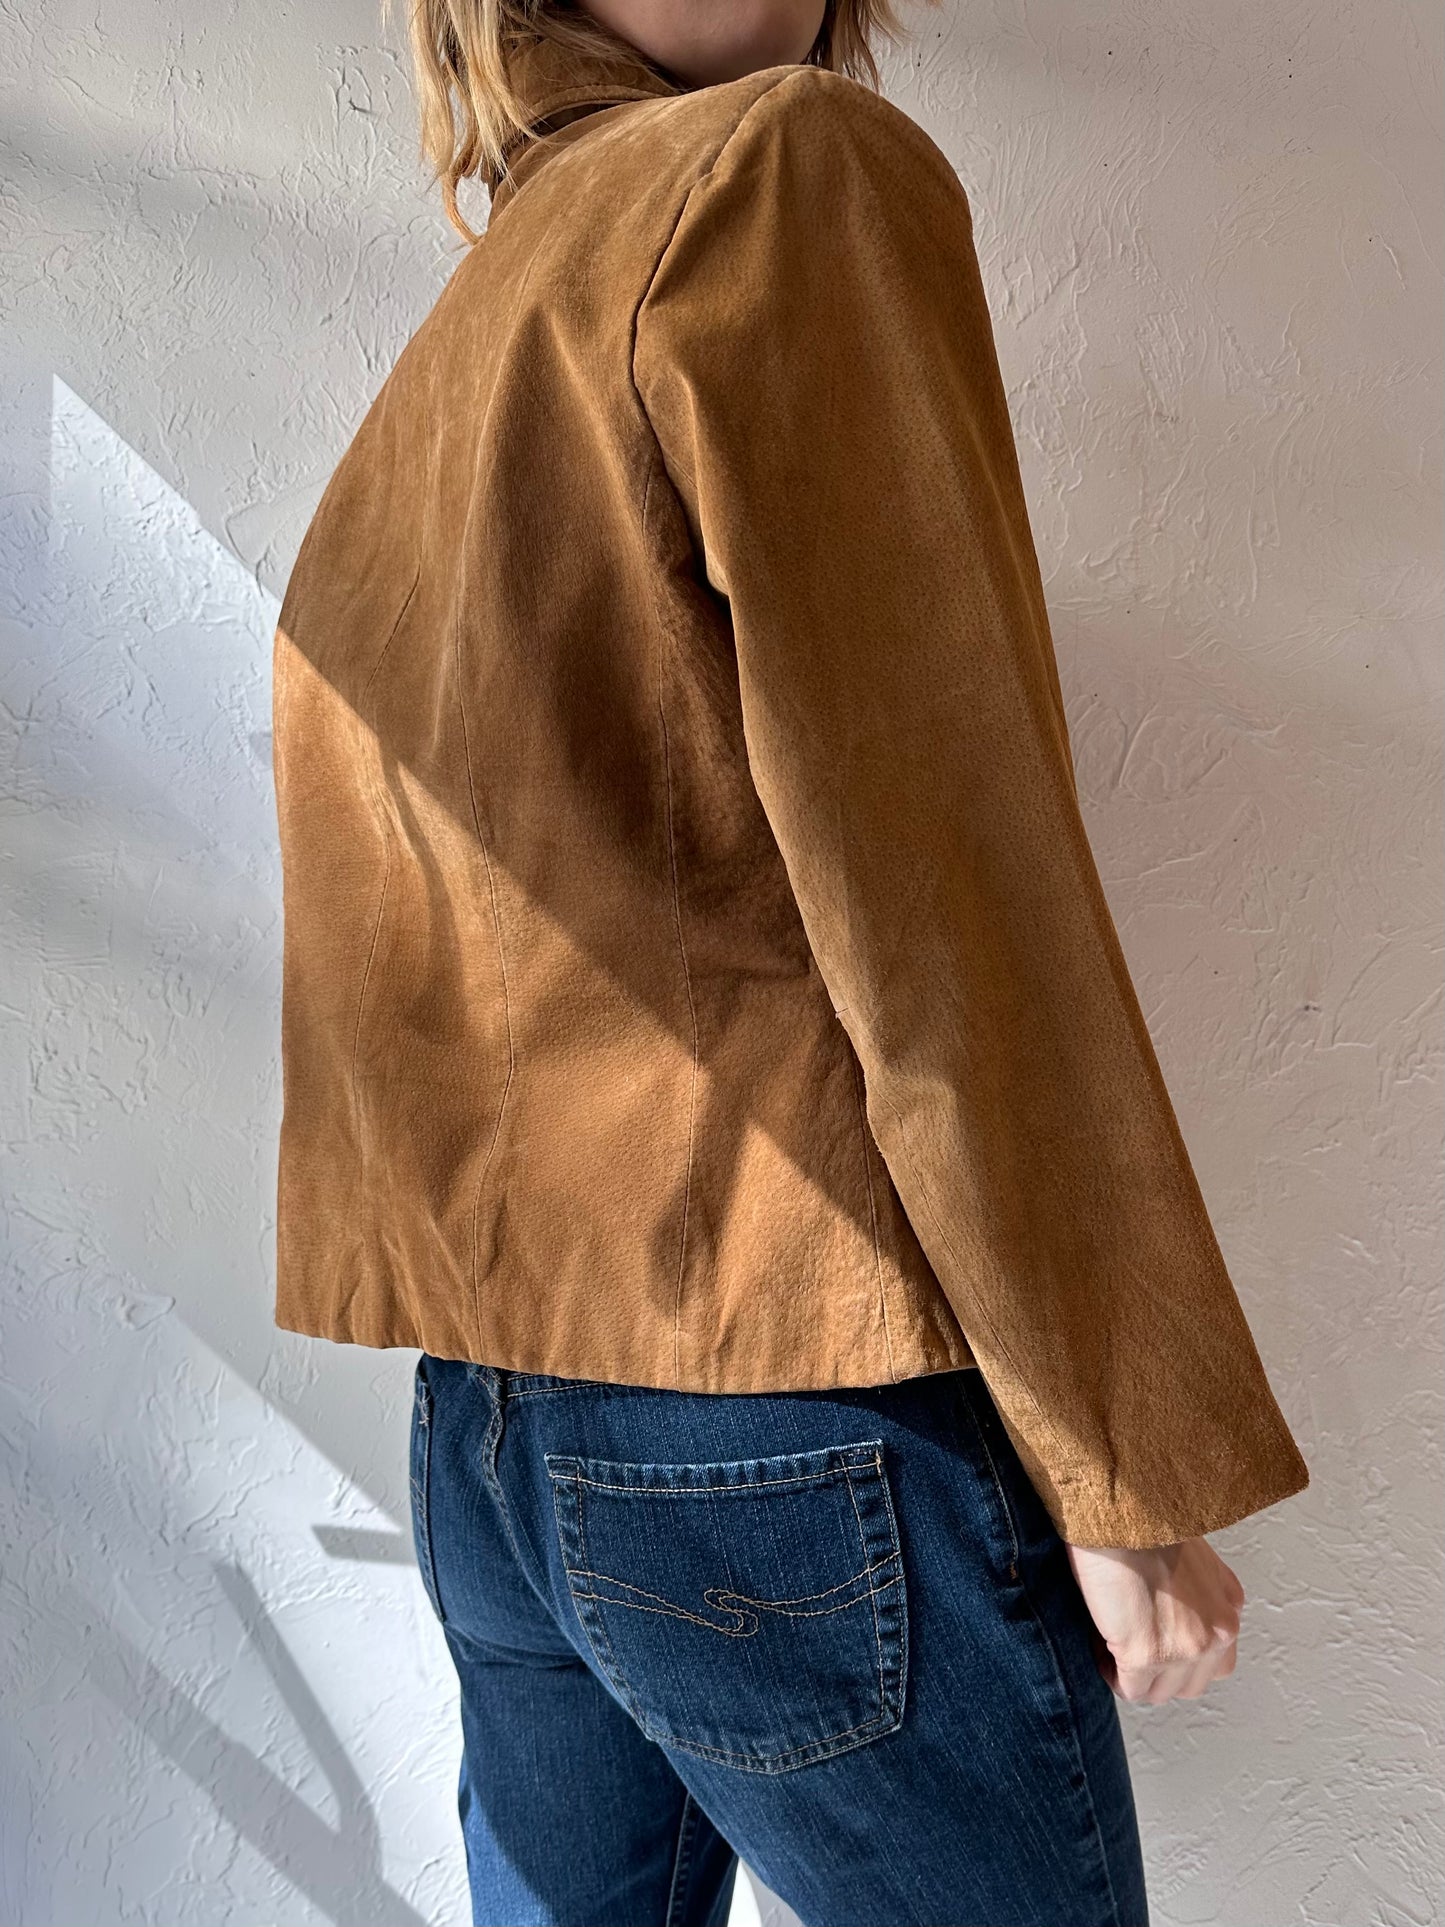 Y2k 'Kathy Ireland' Brown Suede Leather Jacket / Small